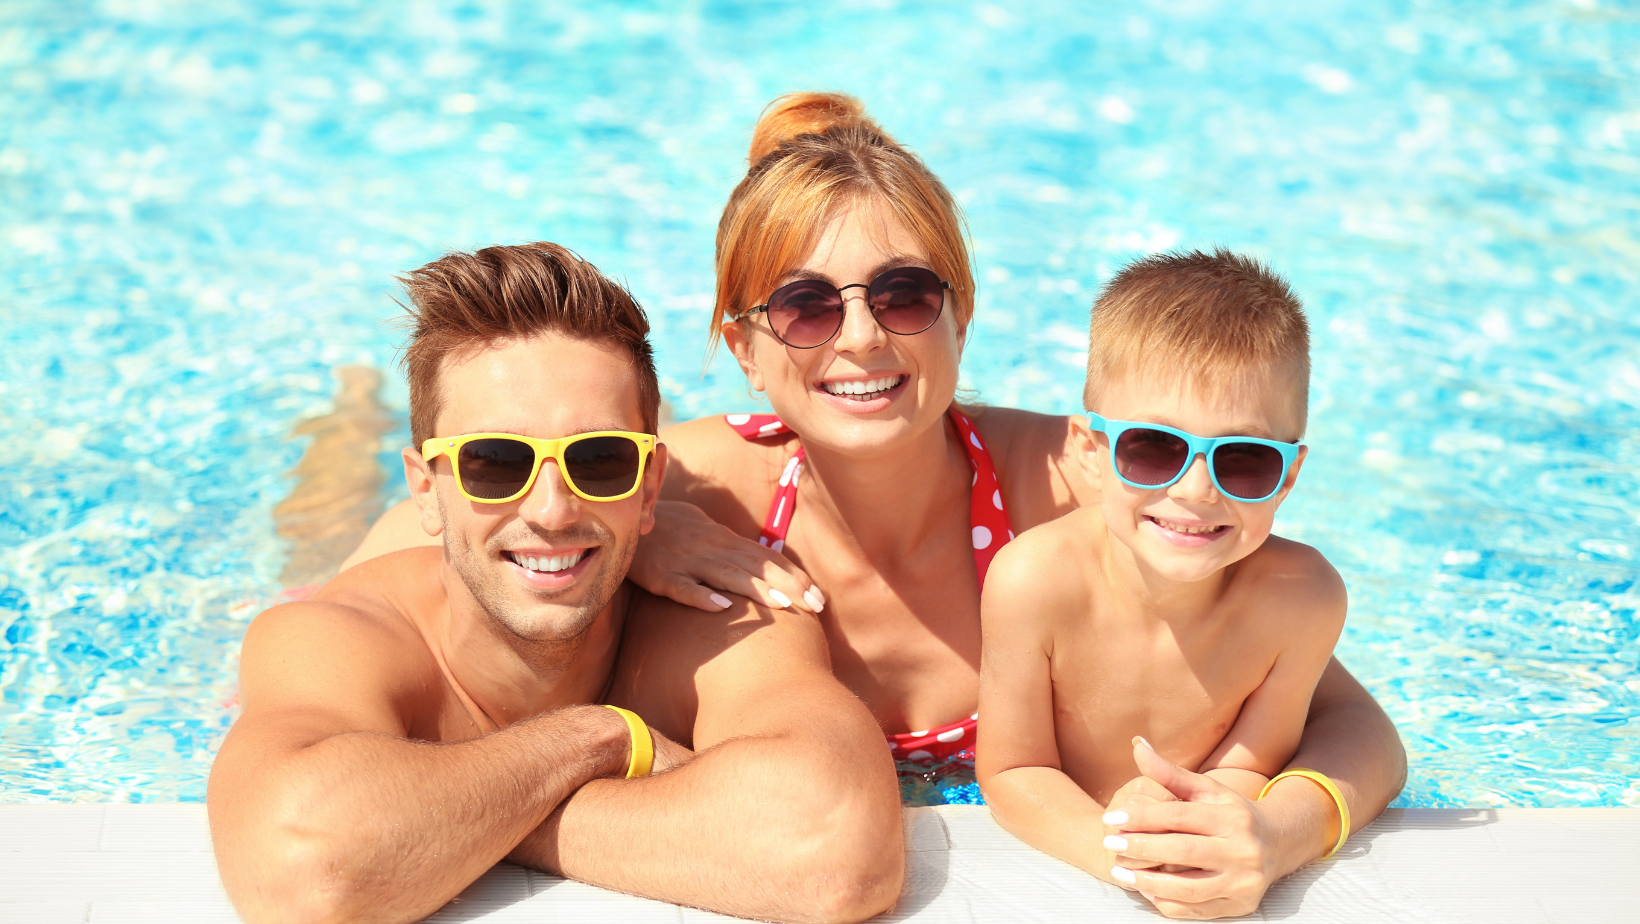 A family practicing pool safety and enjoying the summer.